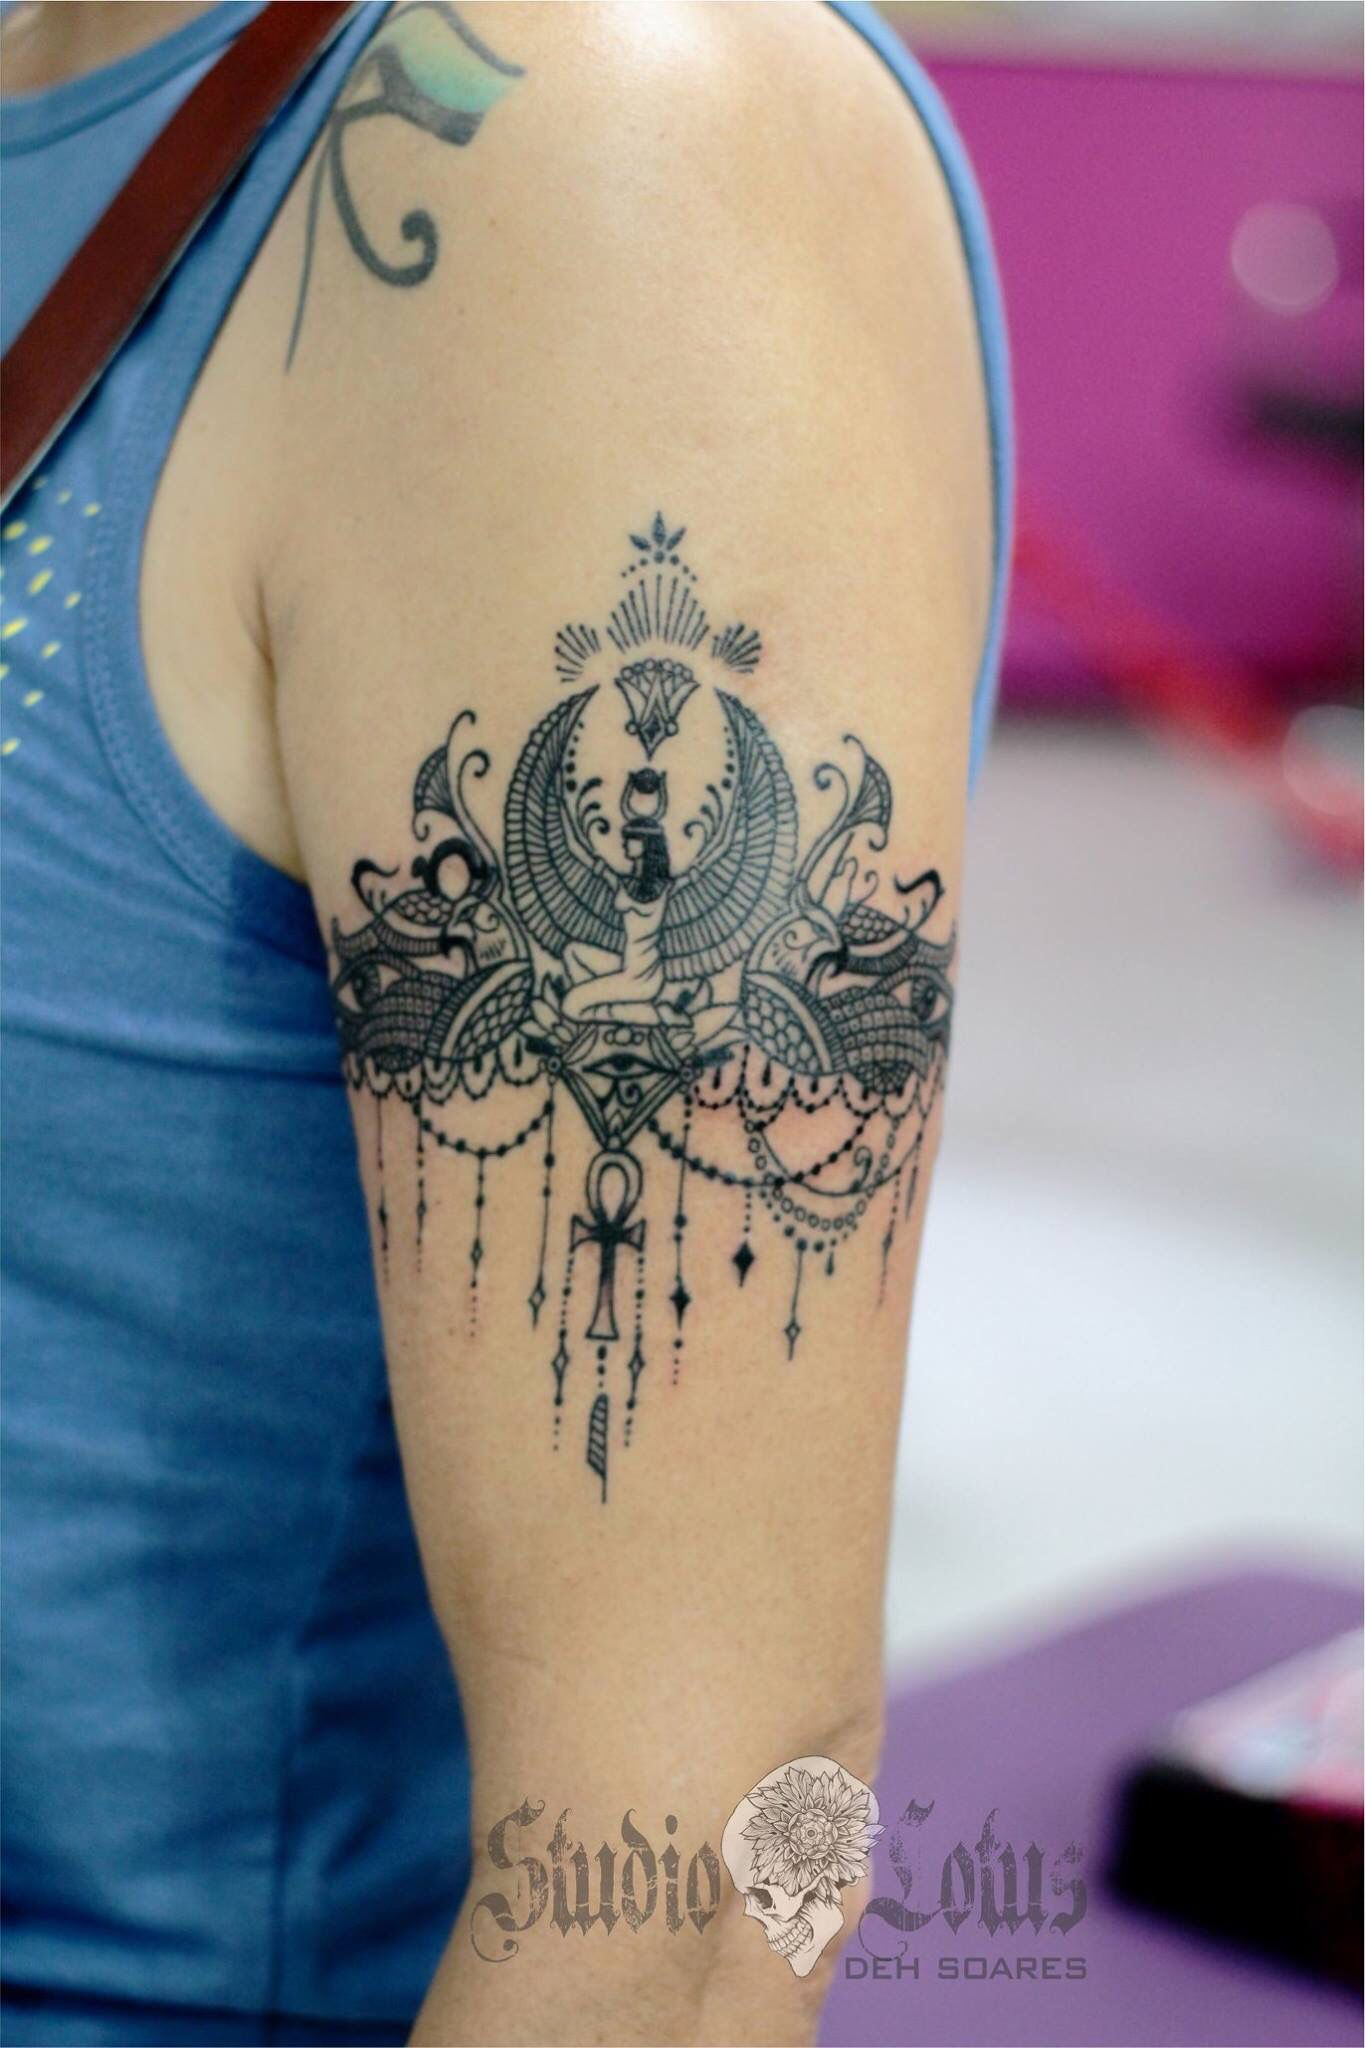 Isis Egyptian Armband Tattoo Done At Studio Lotus Campinas Sp throughout proportions 1365 X 2048